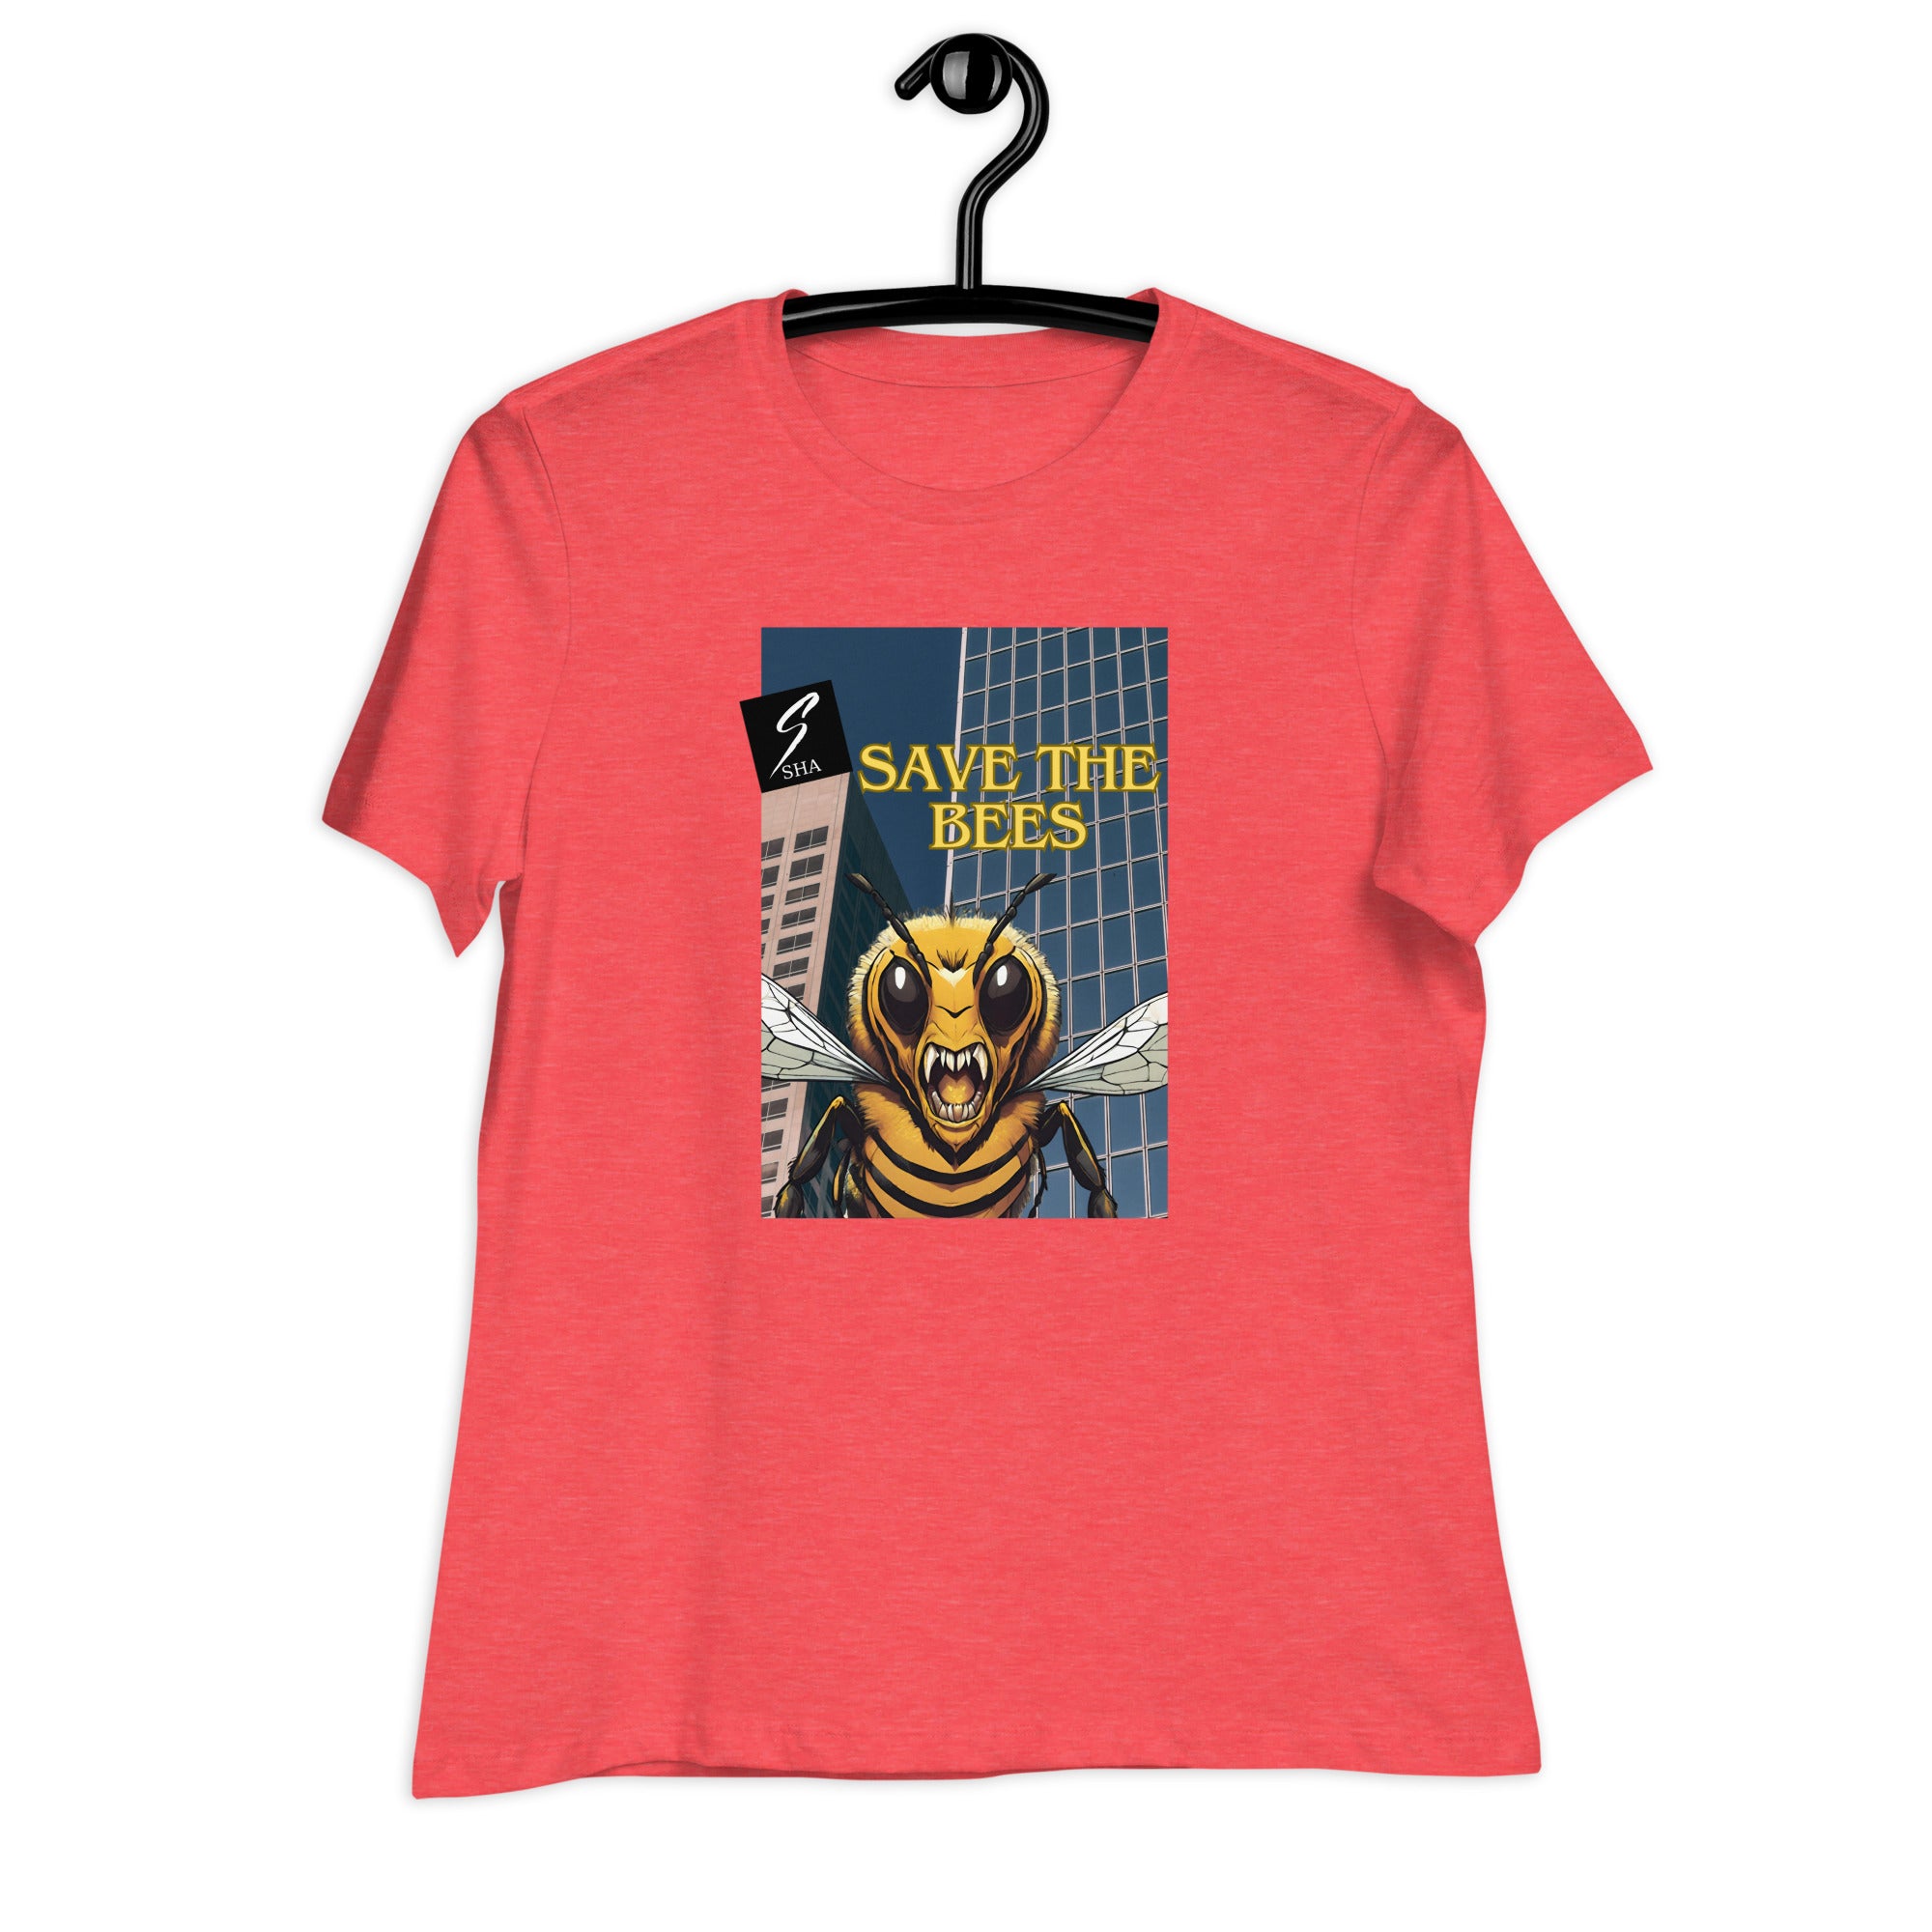 Save the bees-Women's Relaxed T-Shirt